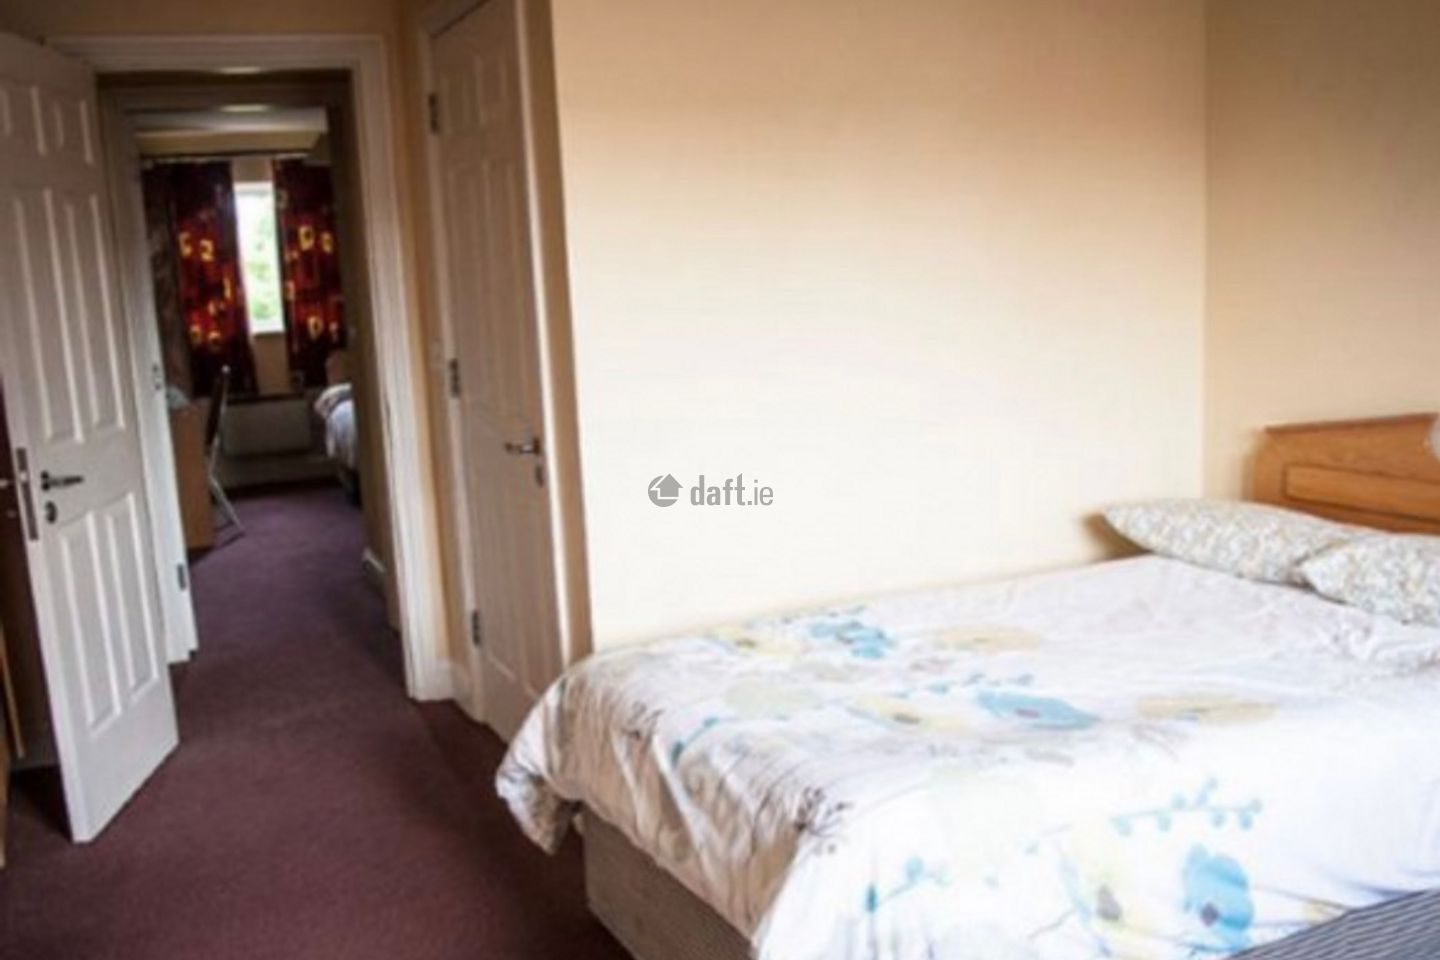 Kings Court Student & Holiday Accommodation, Block, Tralee, Co. Kerry